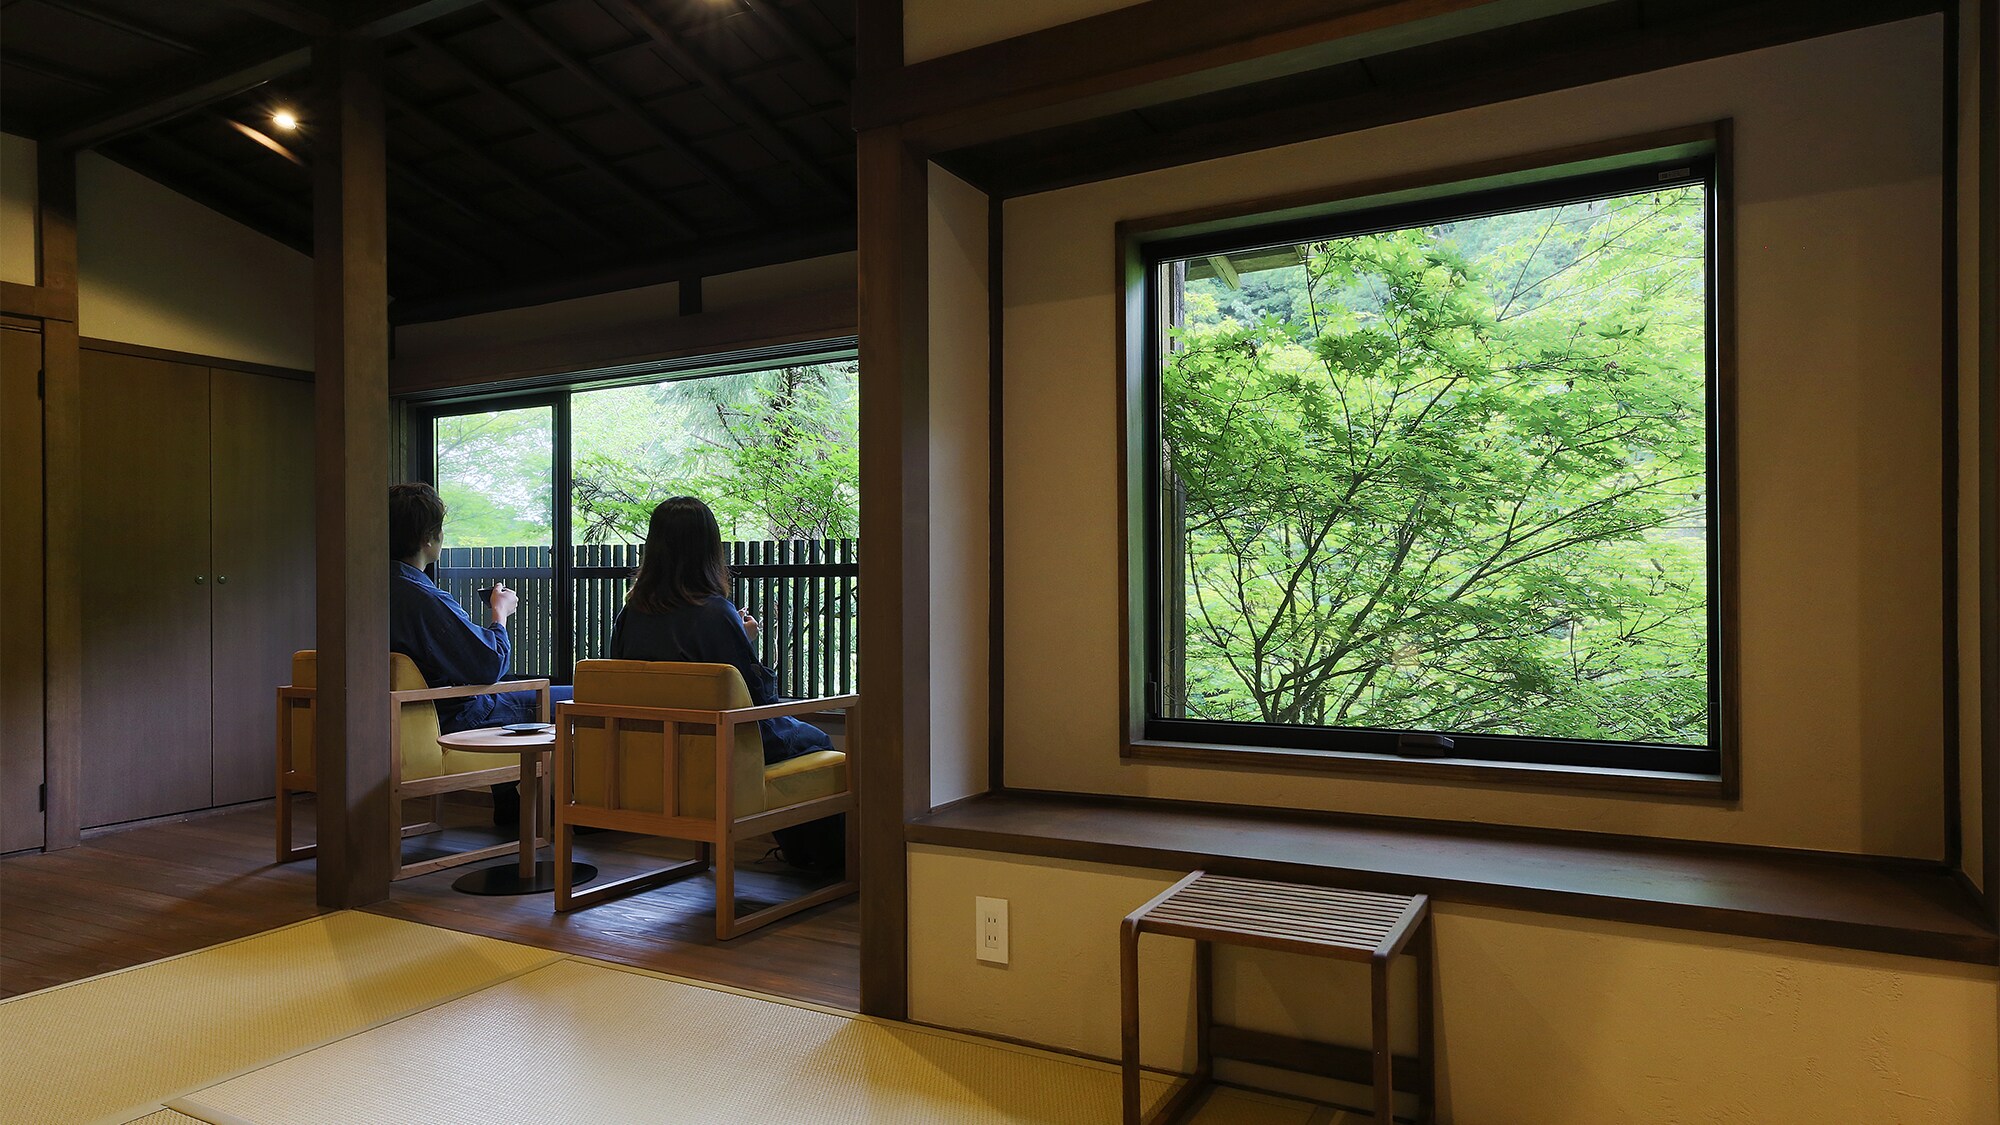 Hotel information and reservations for Meisho Tenryukyo Onsen